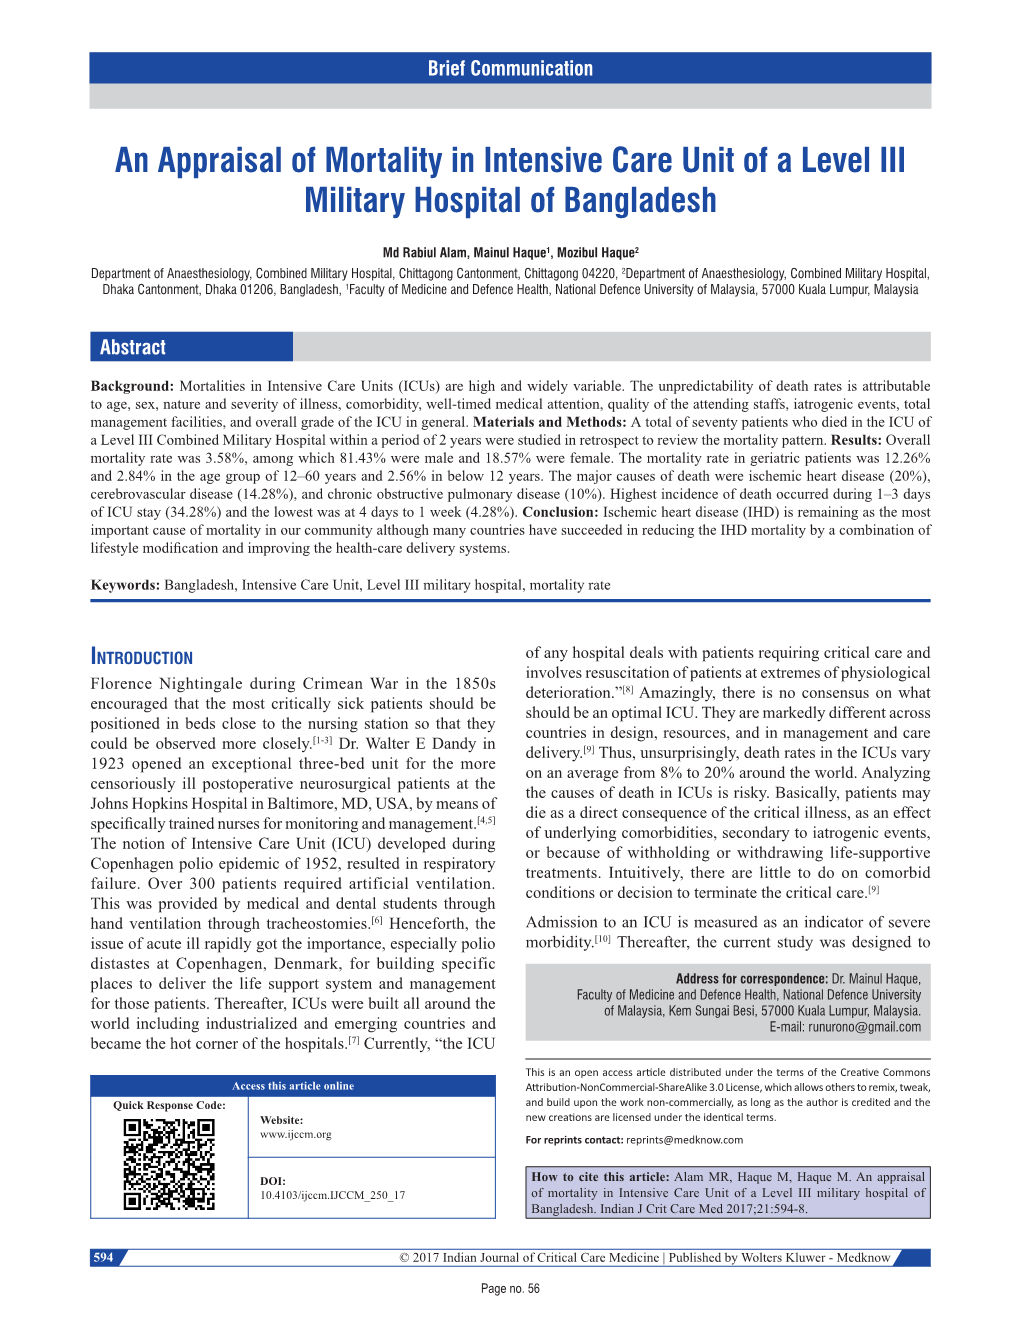 An Appraisal of Mortality in Intensive Care Unit of a Level III Military Hospital of Bangladesh